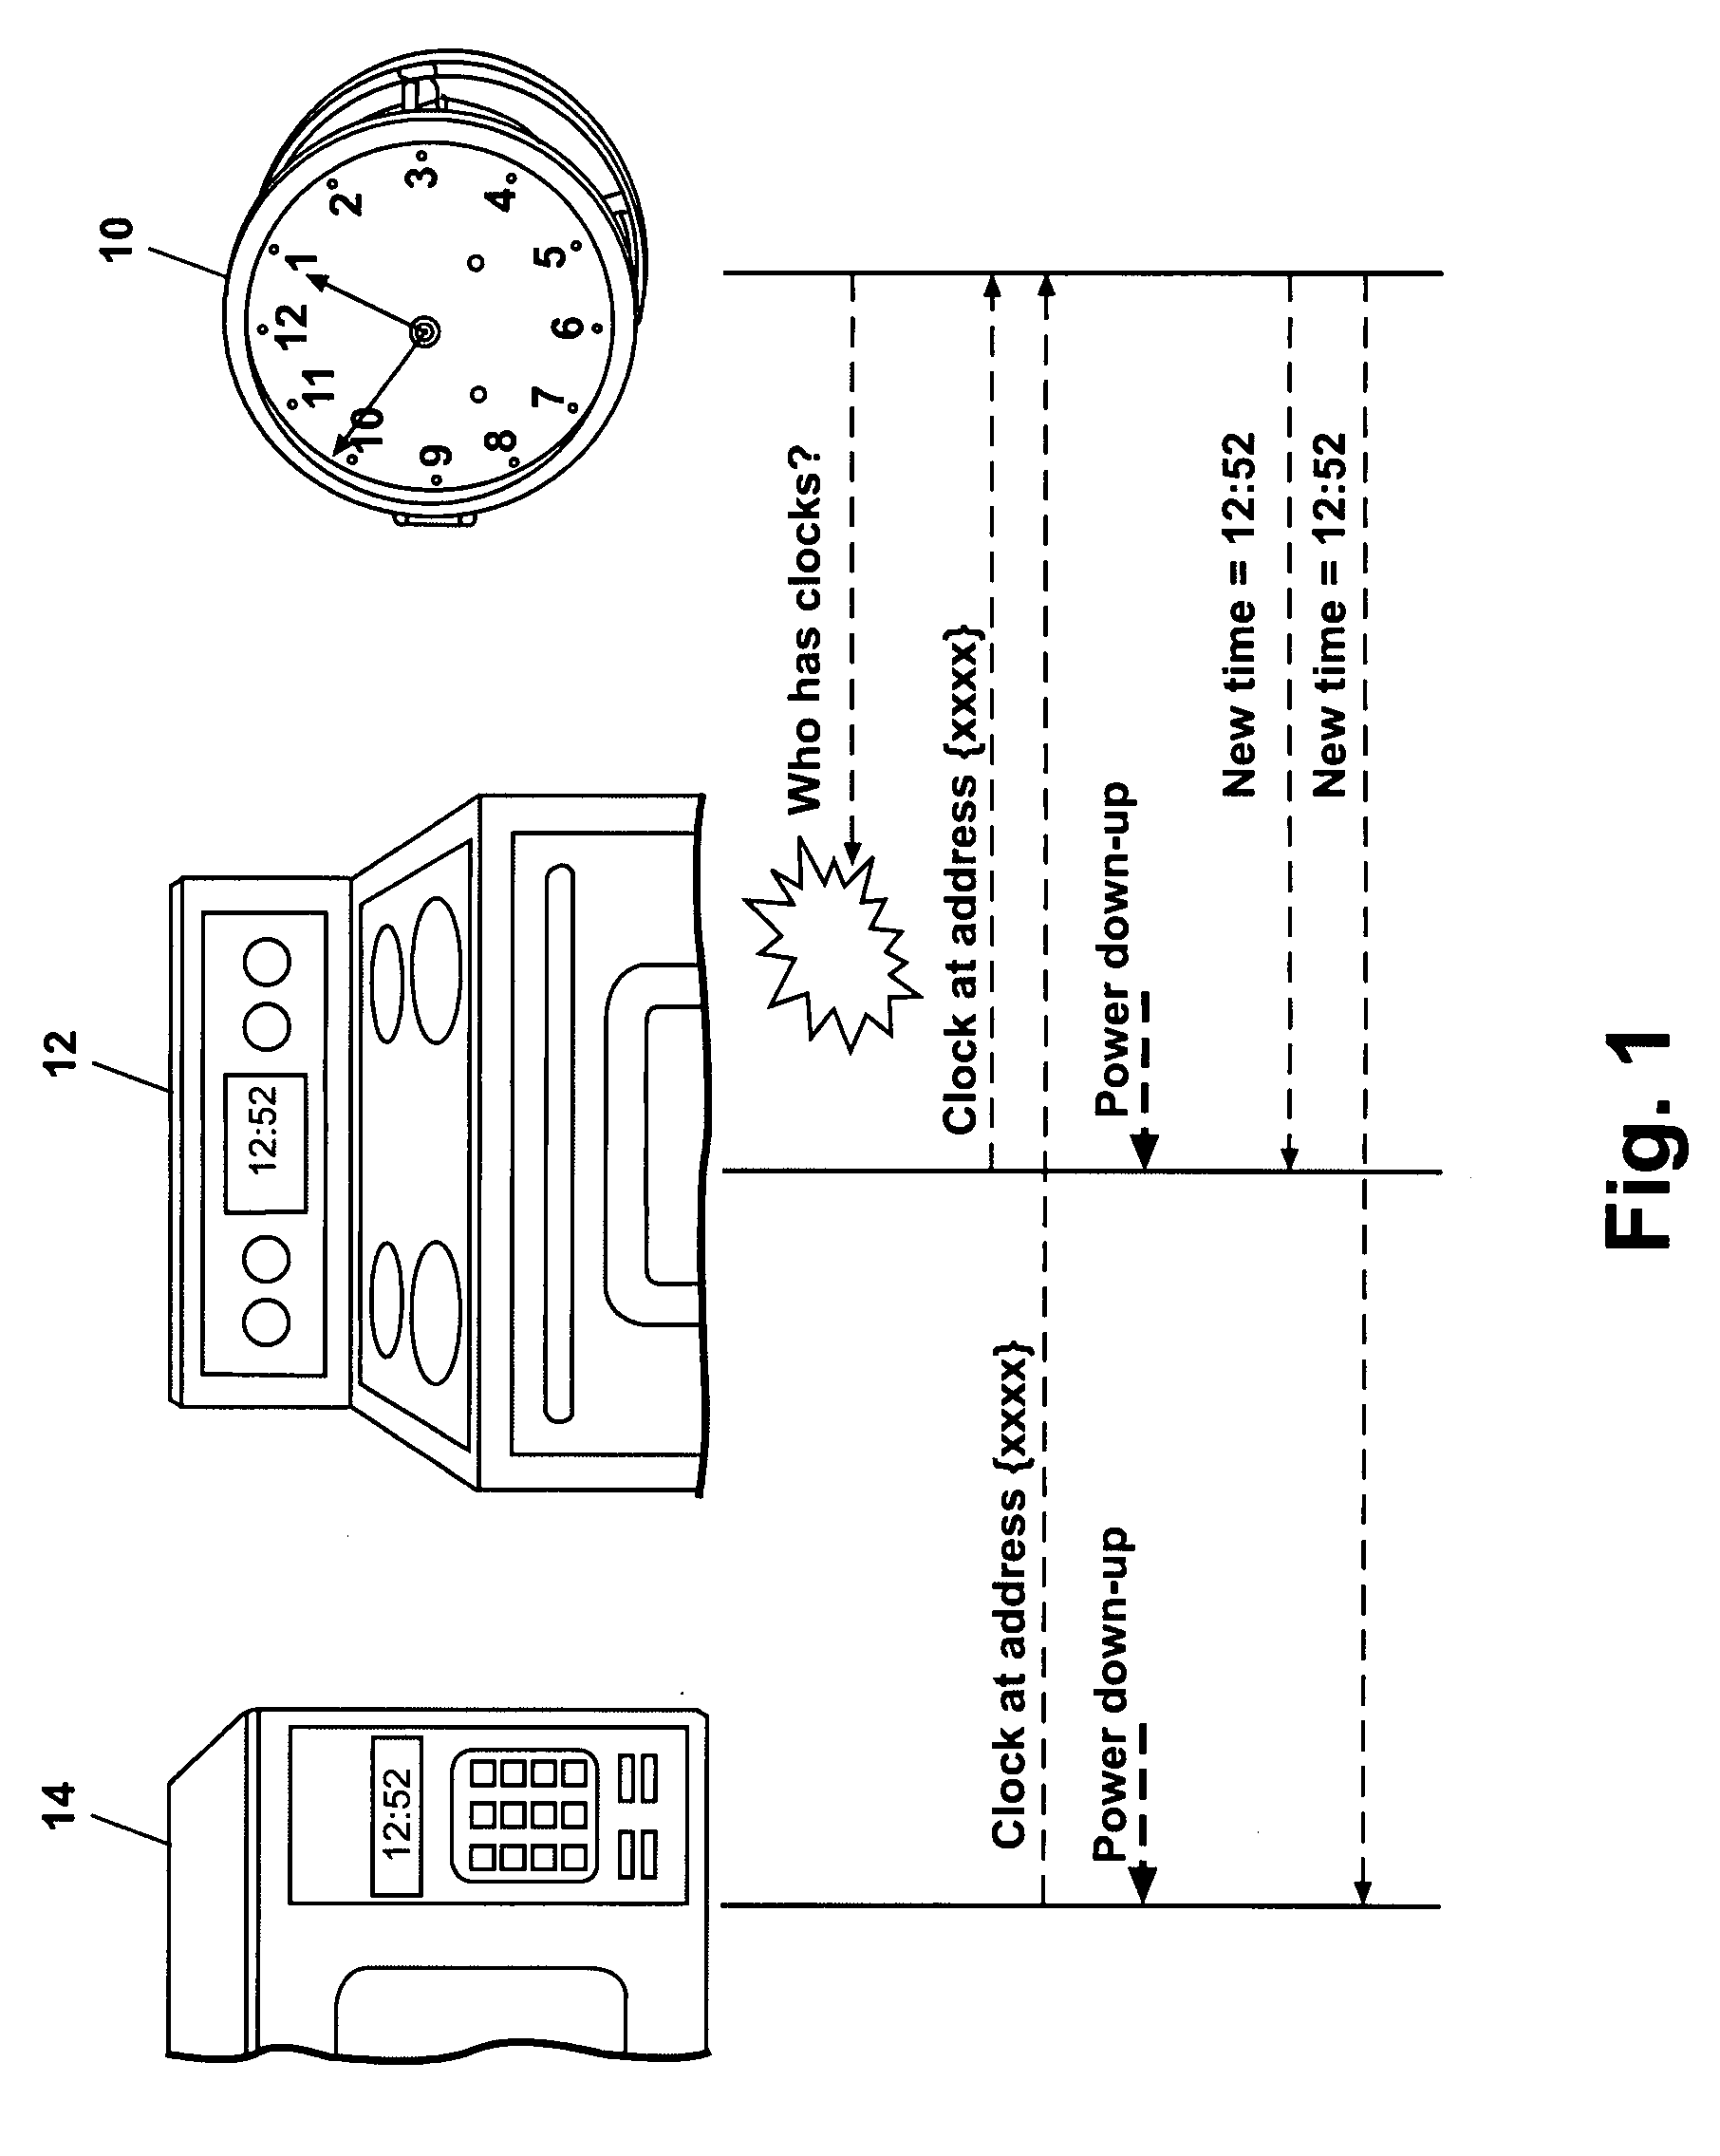 Smart current attenuator  for energy conservation in appliances